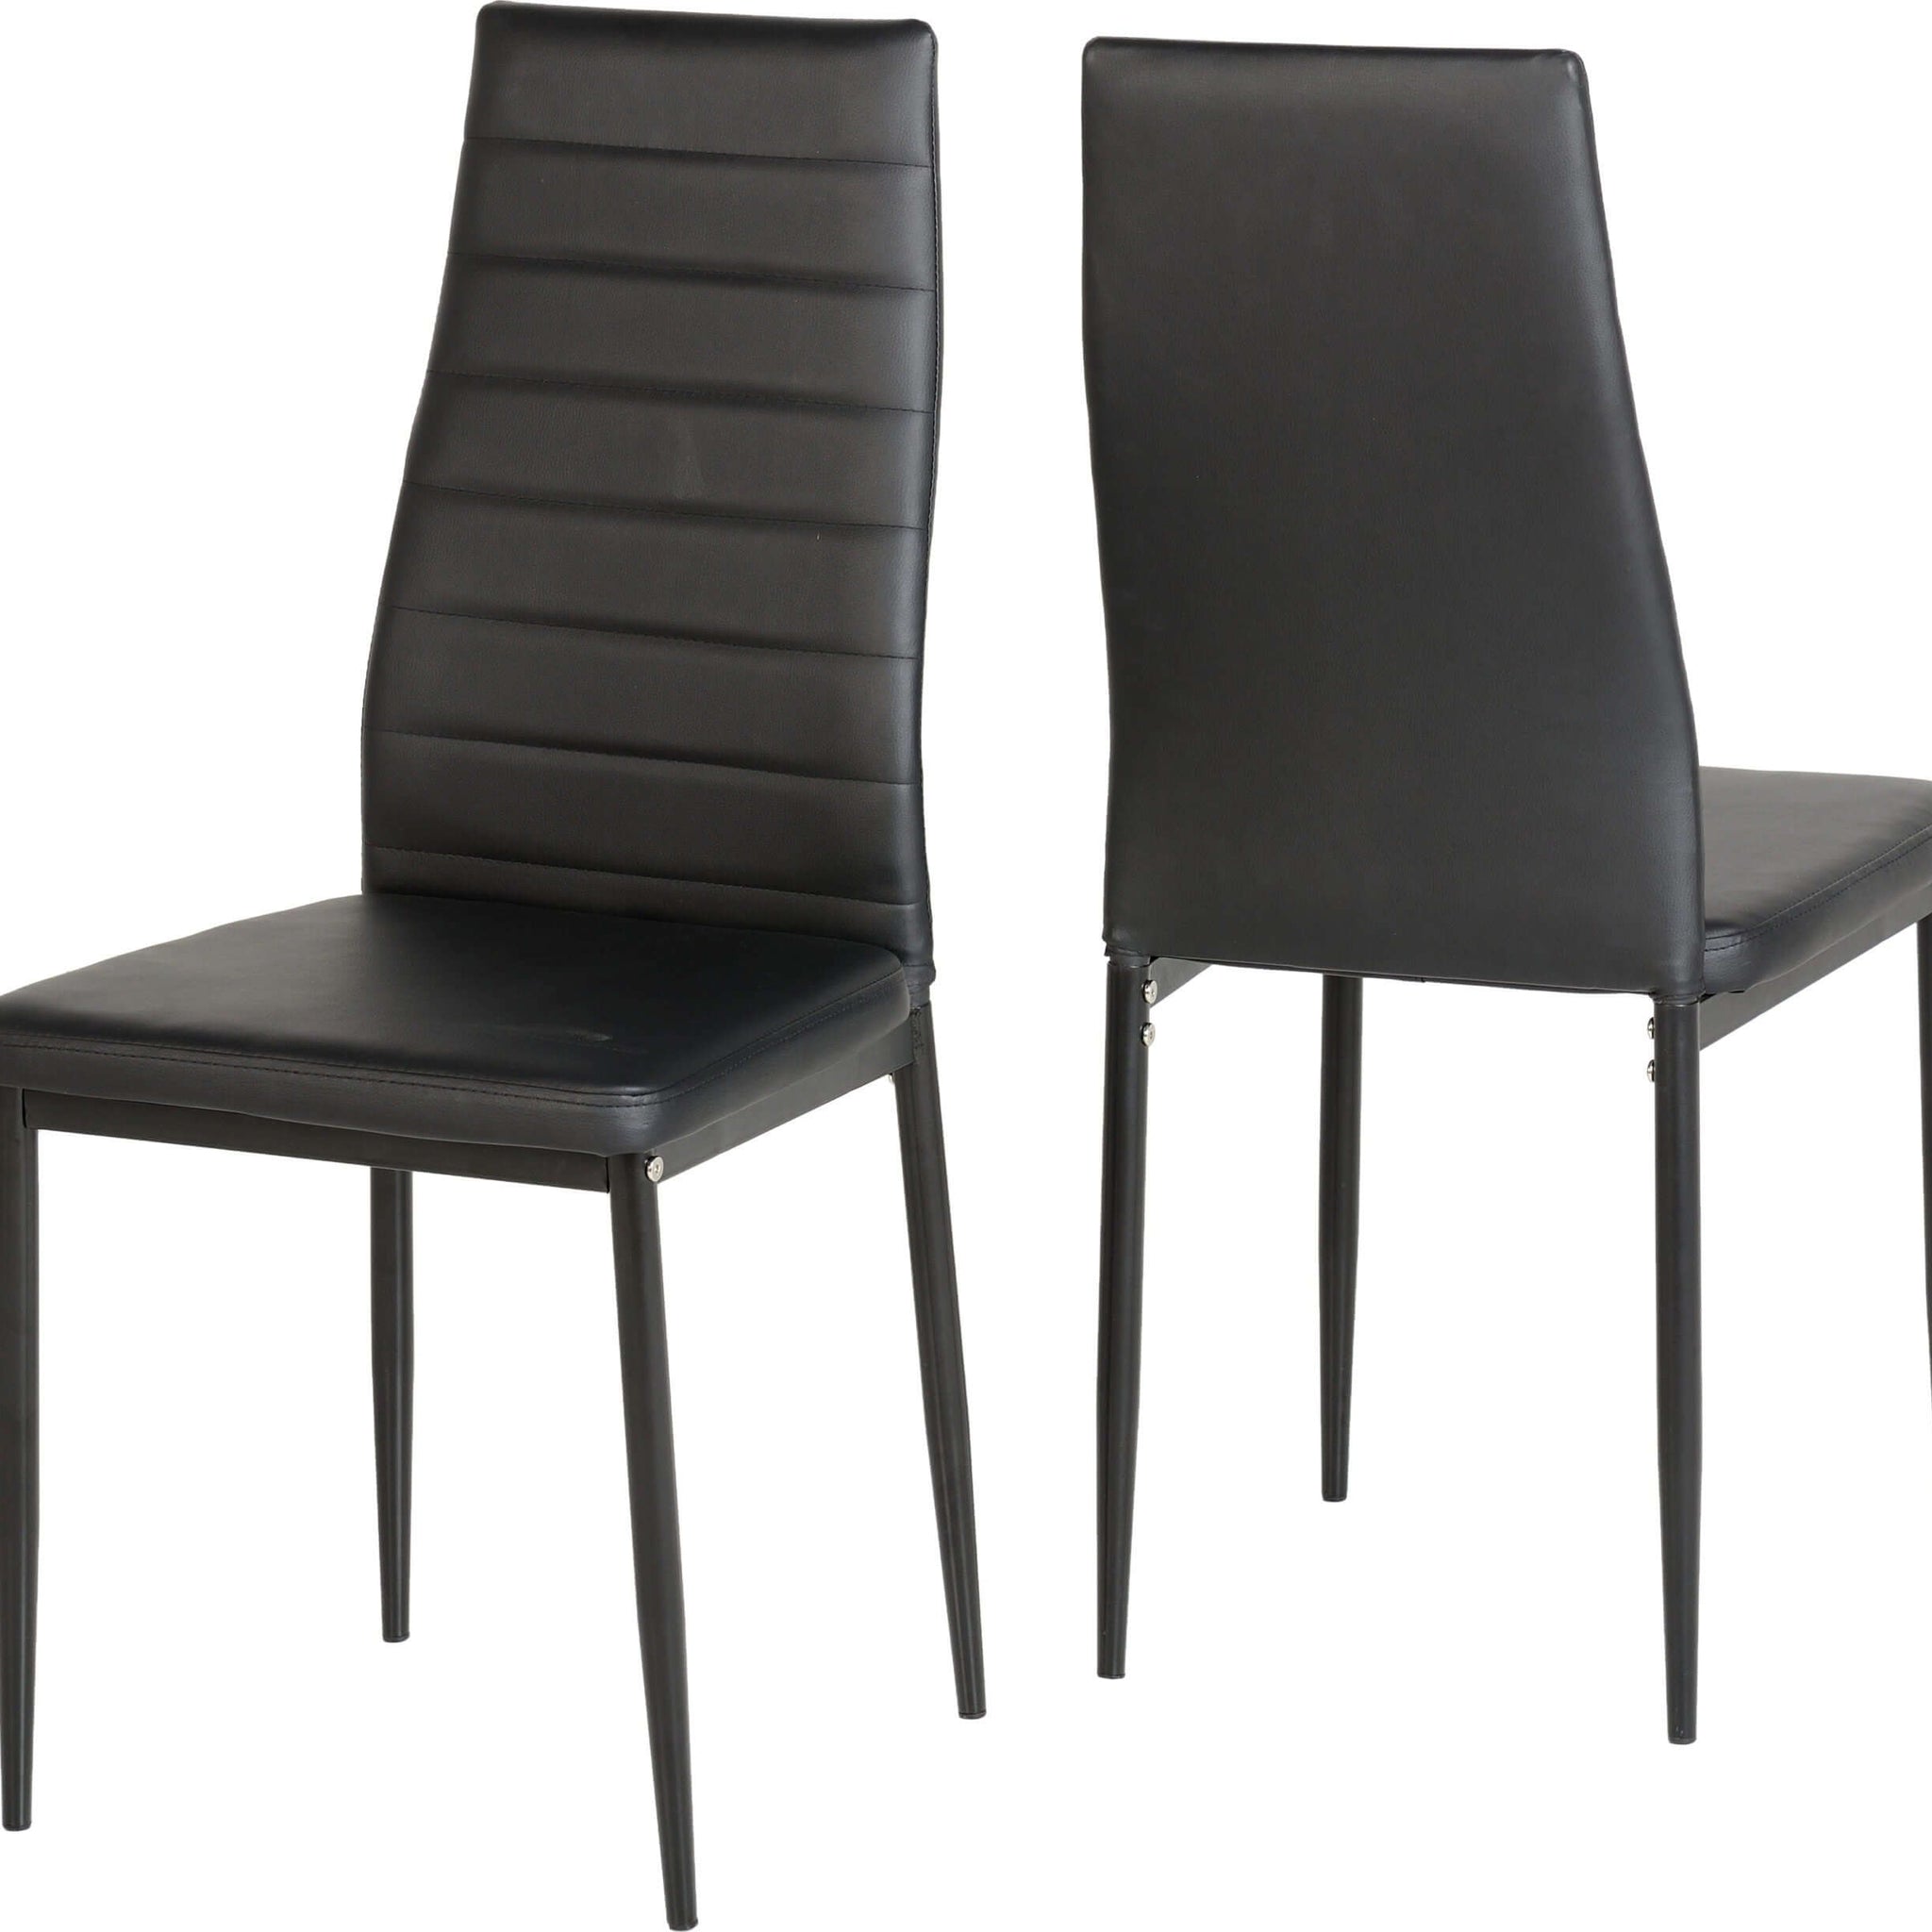 Abbey Chair x 2 Black Faux Leather- The Right Buy Store